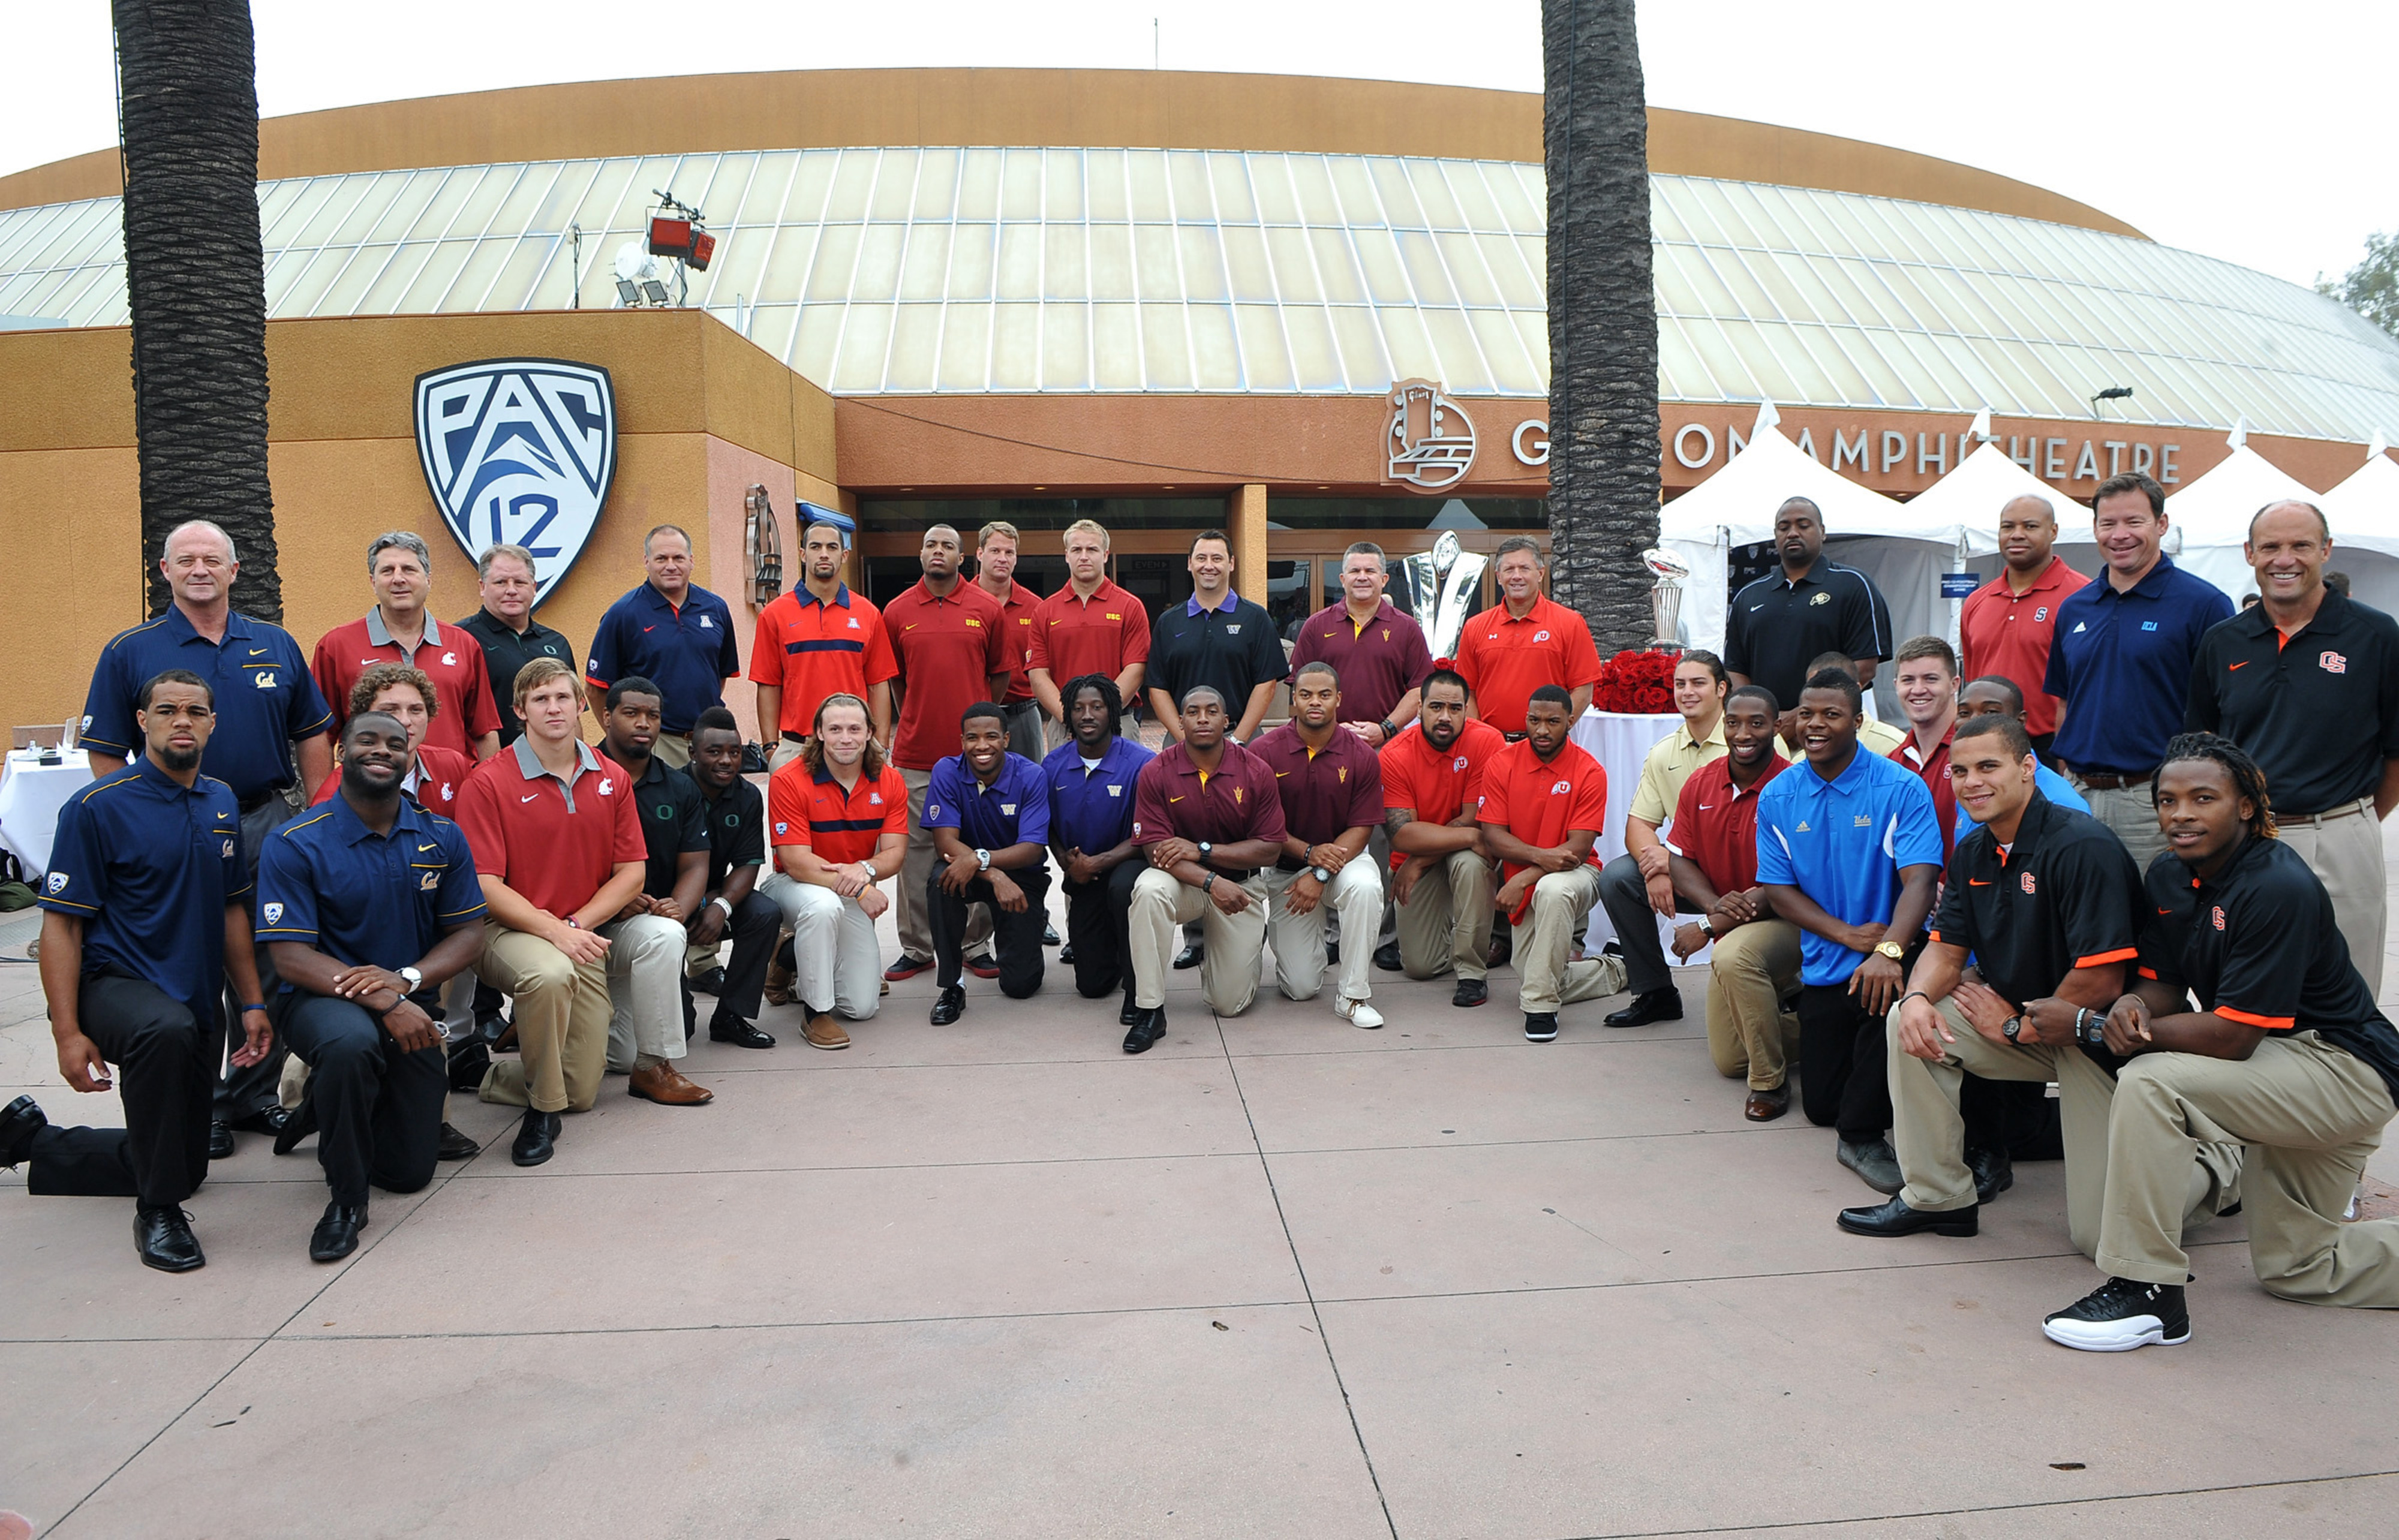 July 24, 2012; Los Angeles, CA, USA;    Players and coaches pose for a photo before the start of PAC-12 Media Day at Universal Studios Hollywood. Mandatory Credit: Jayne Kamin-Oncea-US PRESSWIRE